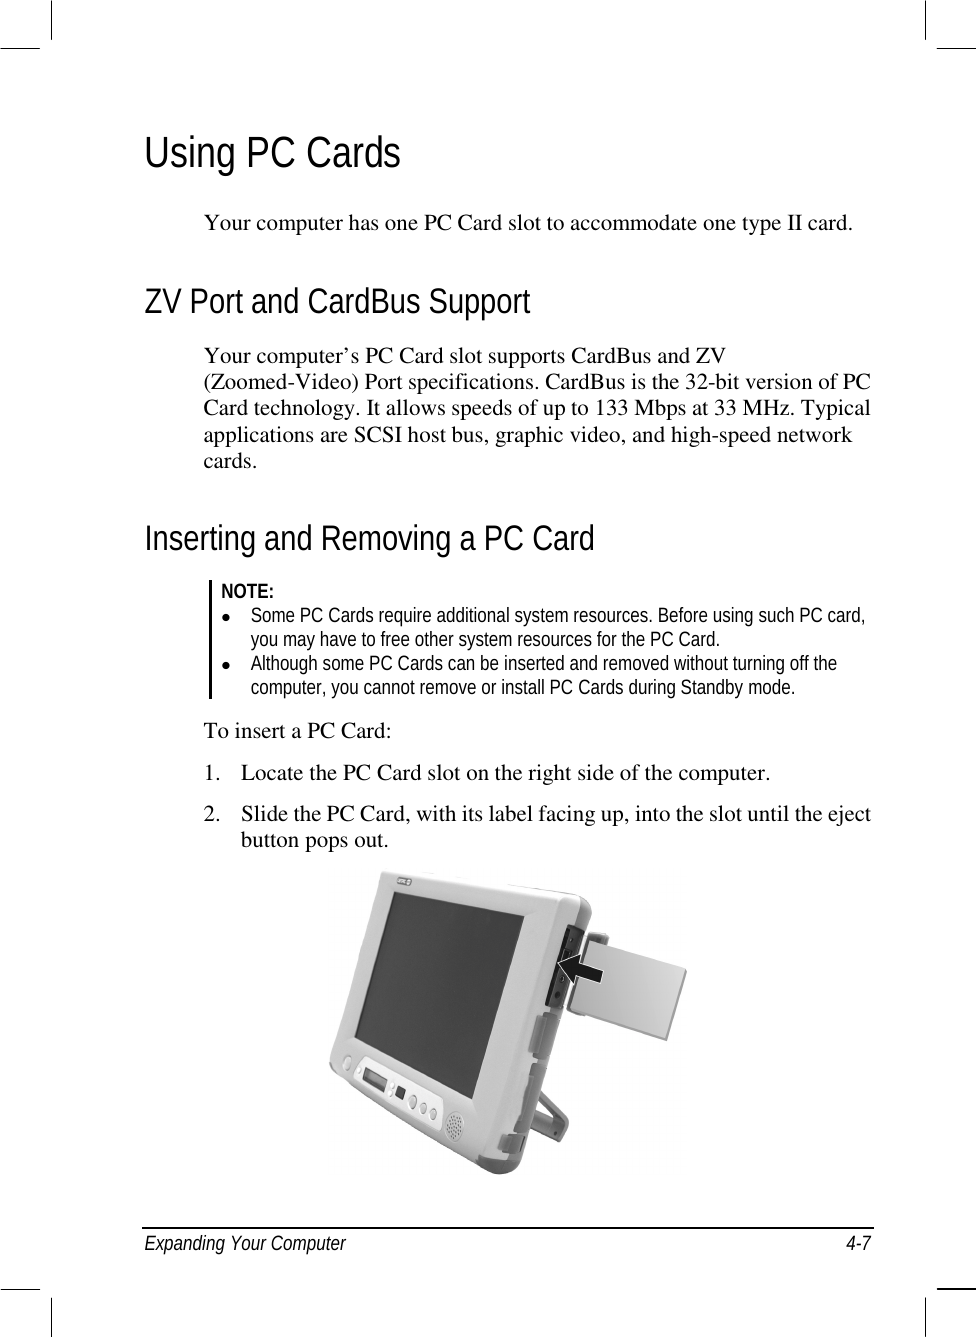  Expanding Your Computer  4-7 Using PC Cards Your computer has one PC Card slot to accommodate one type II card. ZV Port and CardBus Support Your computer’s PC Card slot supports CardBus and ZV (Zoomed-Video) Port specifications. CardBus is the 32-bit version of PC Card technology. It allows speeds of up to 133 Mbps at 33 MHz. Typical applications are SCSI host bus, graphic video, and high-speed network cards. Inserting and Removing a PC Card NOTE: !  Some PC Cards require additional system resources. Before using such PC card, you may have to free other system resources for the PC Card. !  Although some PC Cards can be inserted and removed without turning off the computer, you cannot remove or install PC Cards during Standby mode.  To insert a PC Card: 1.  Locate the PC Card slot on the right side of the computer. 2.  Slide the PC Card, with its label facing up, into the slot until the eject button pops out.   